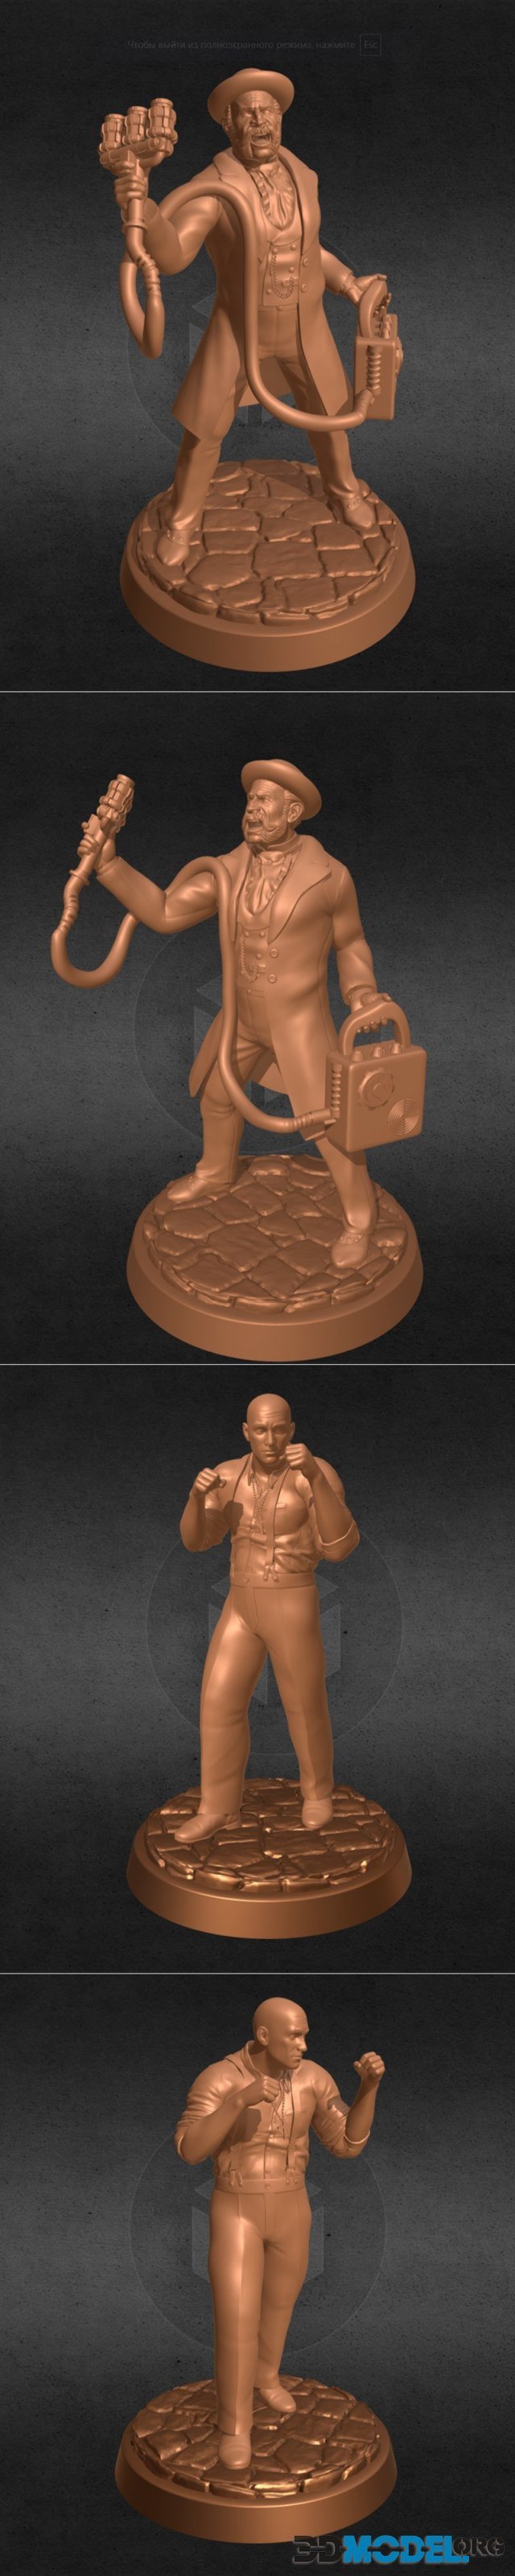 Cientist Call Of Cthulhu and Fighter Call Of Cthulhu – Printable